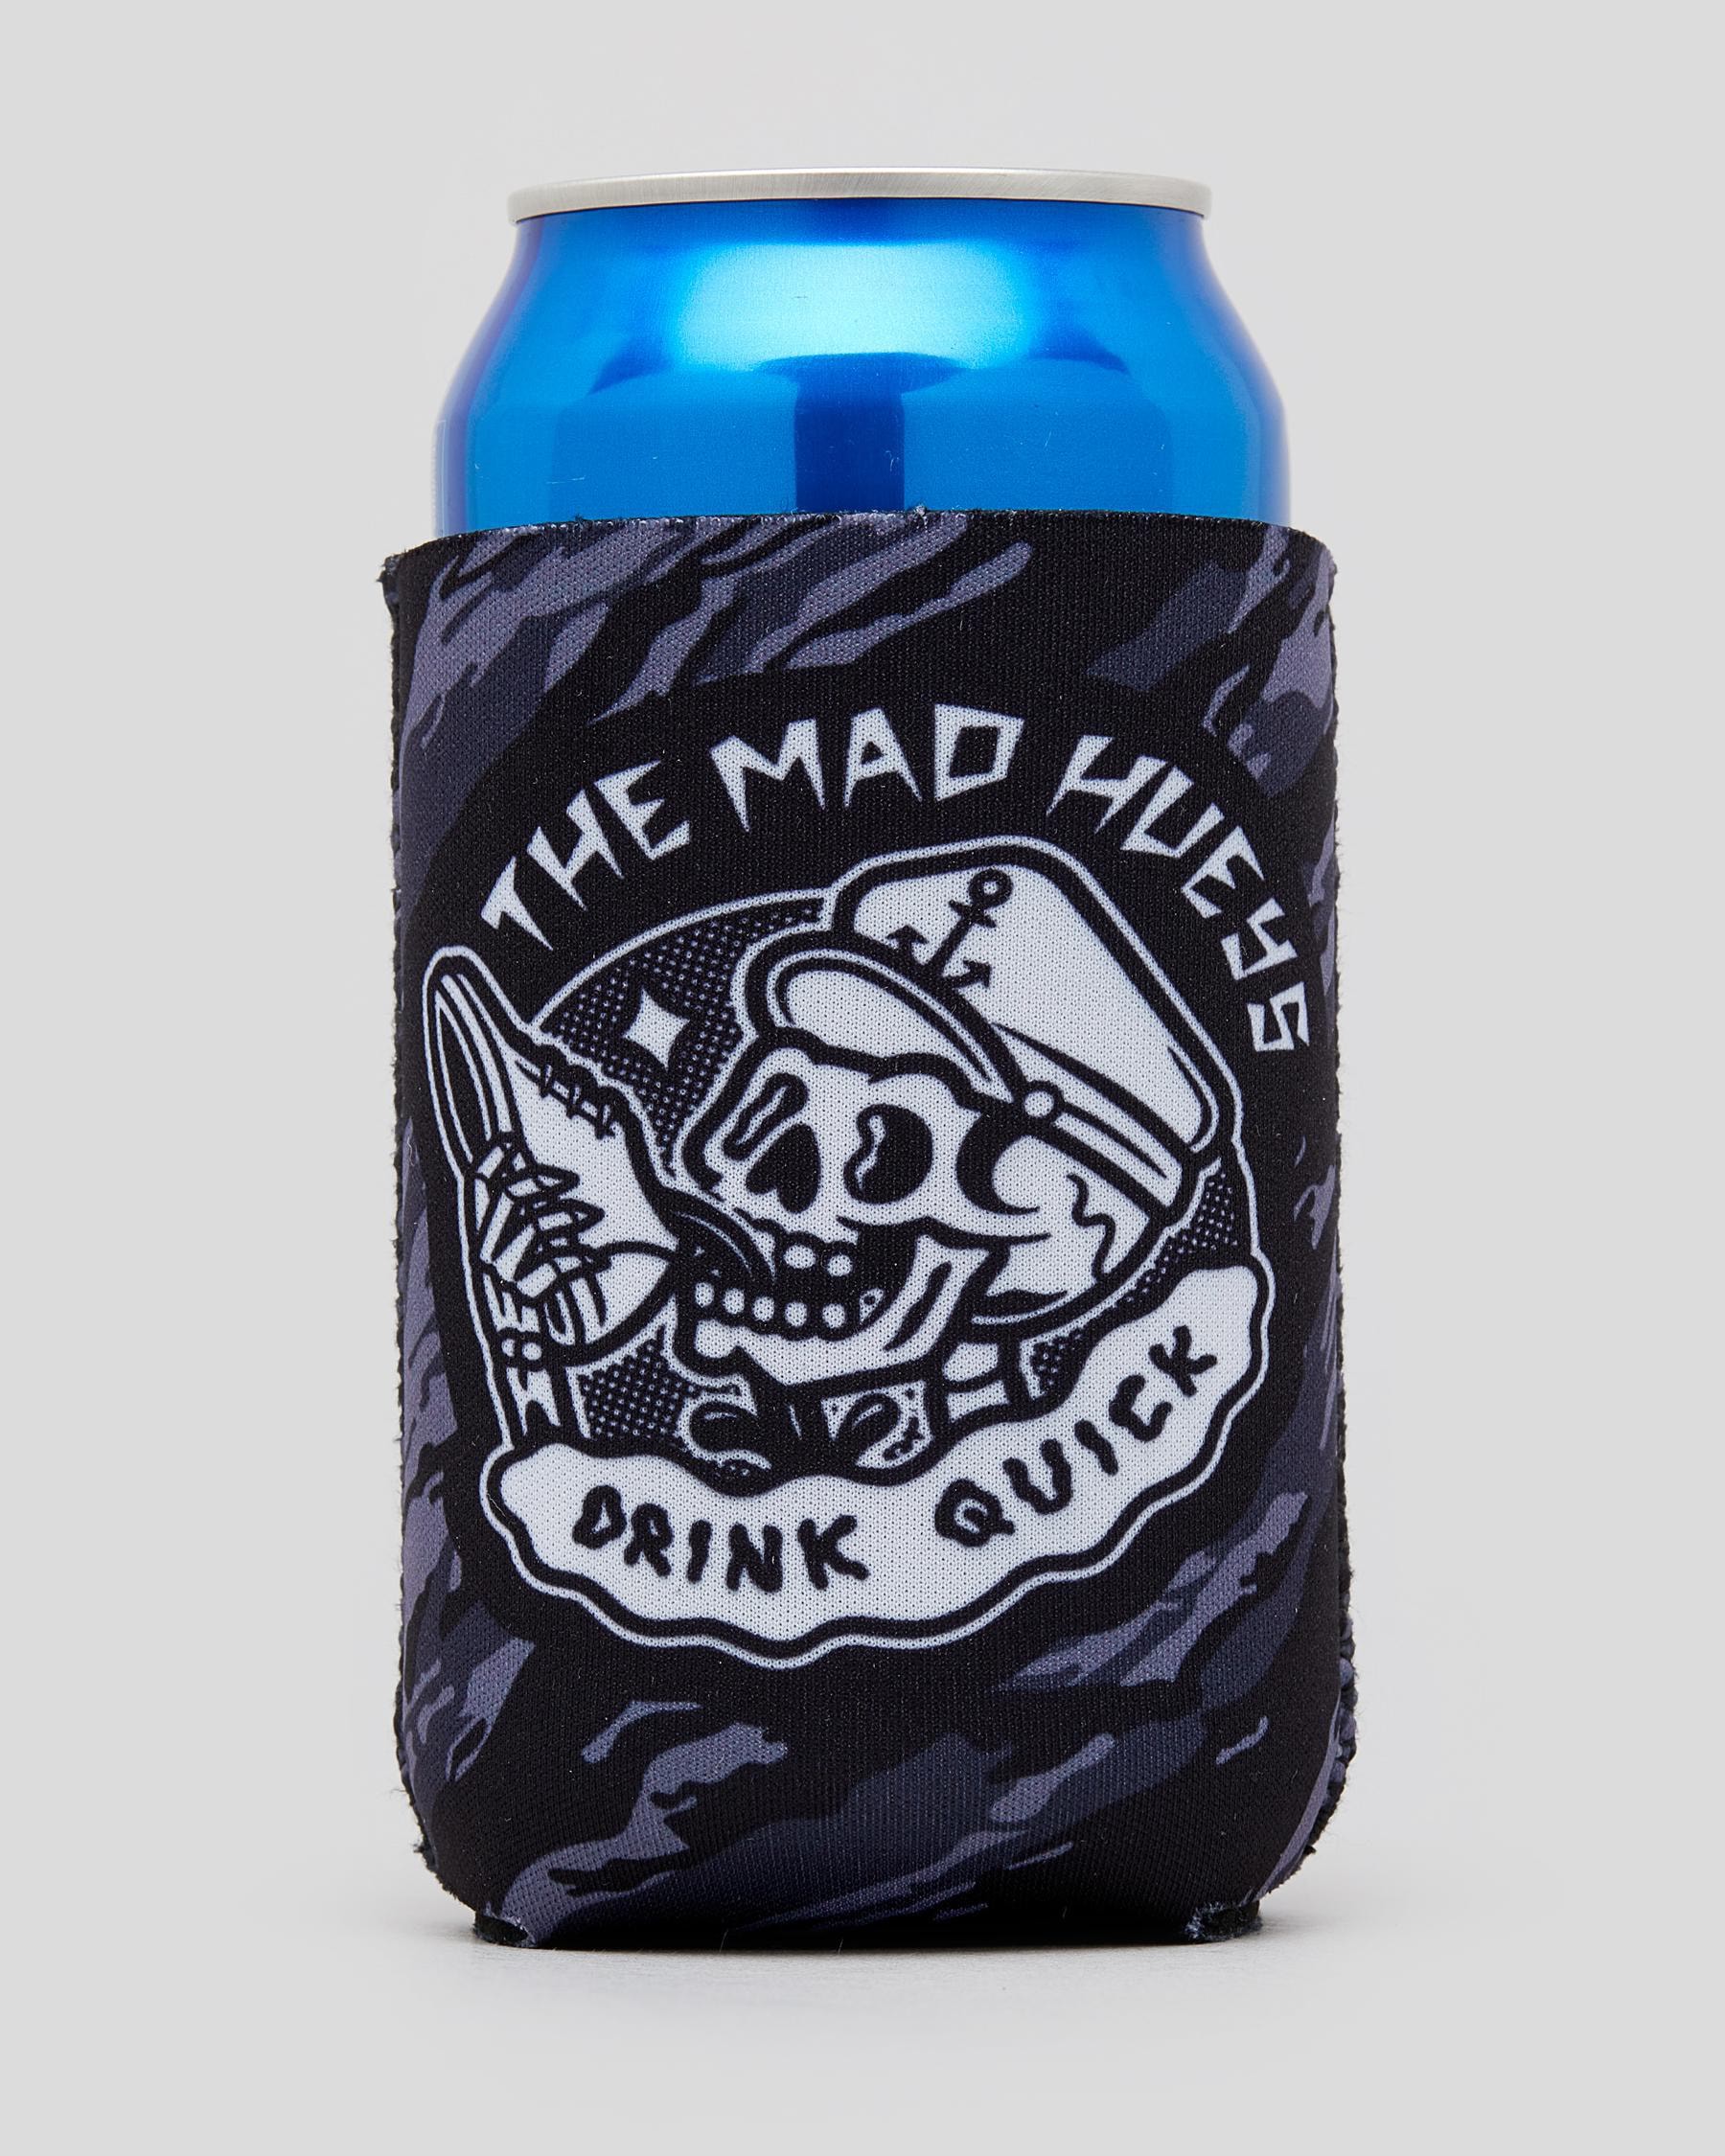 The Mad Hueys Drink Quick Stubby Cooler In Black Camo - Fast Shipping